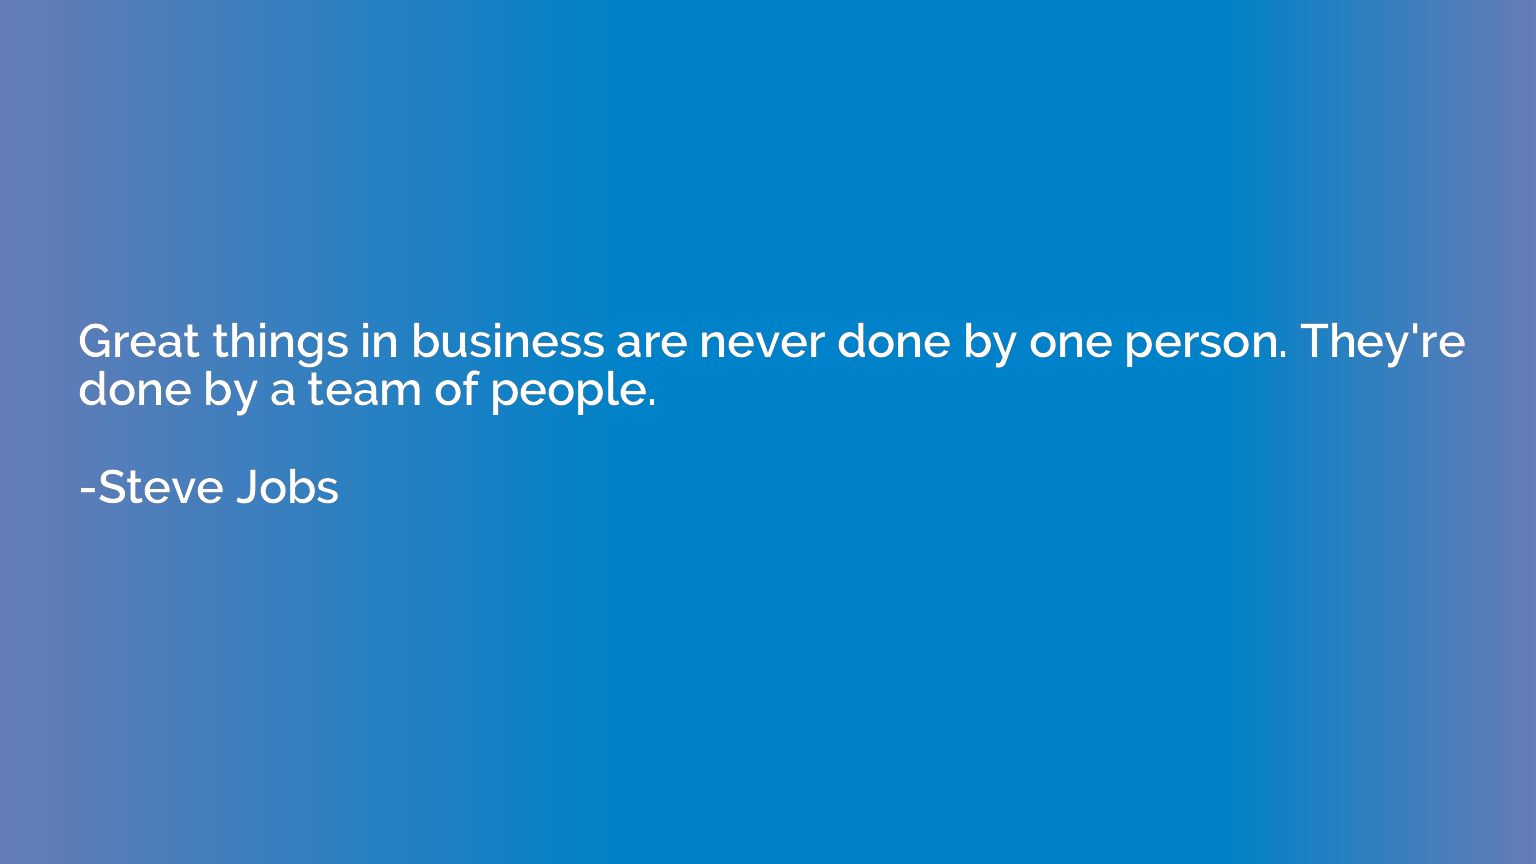 Great things in business are never done by one person. They'